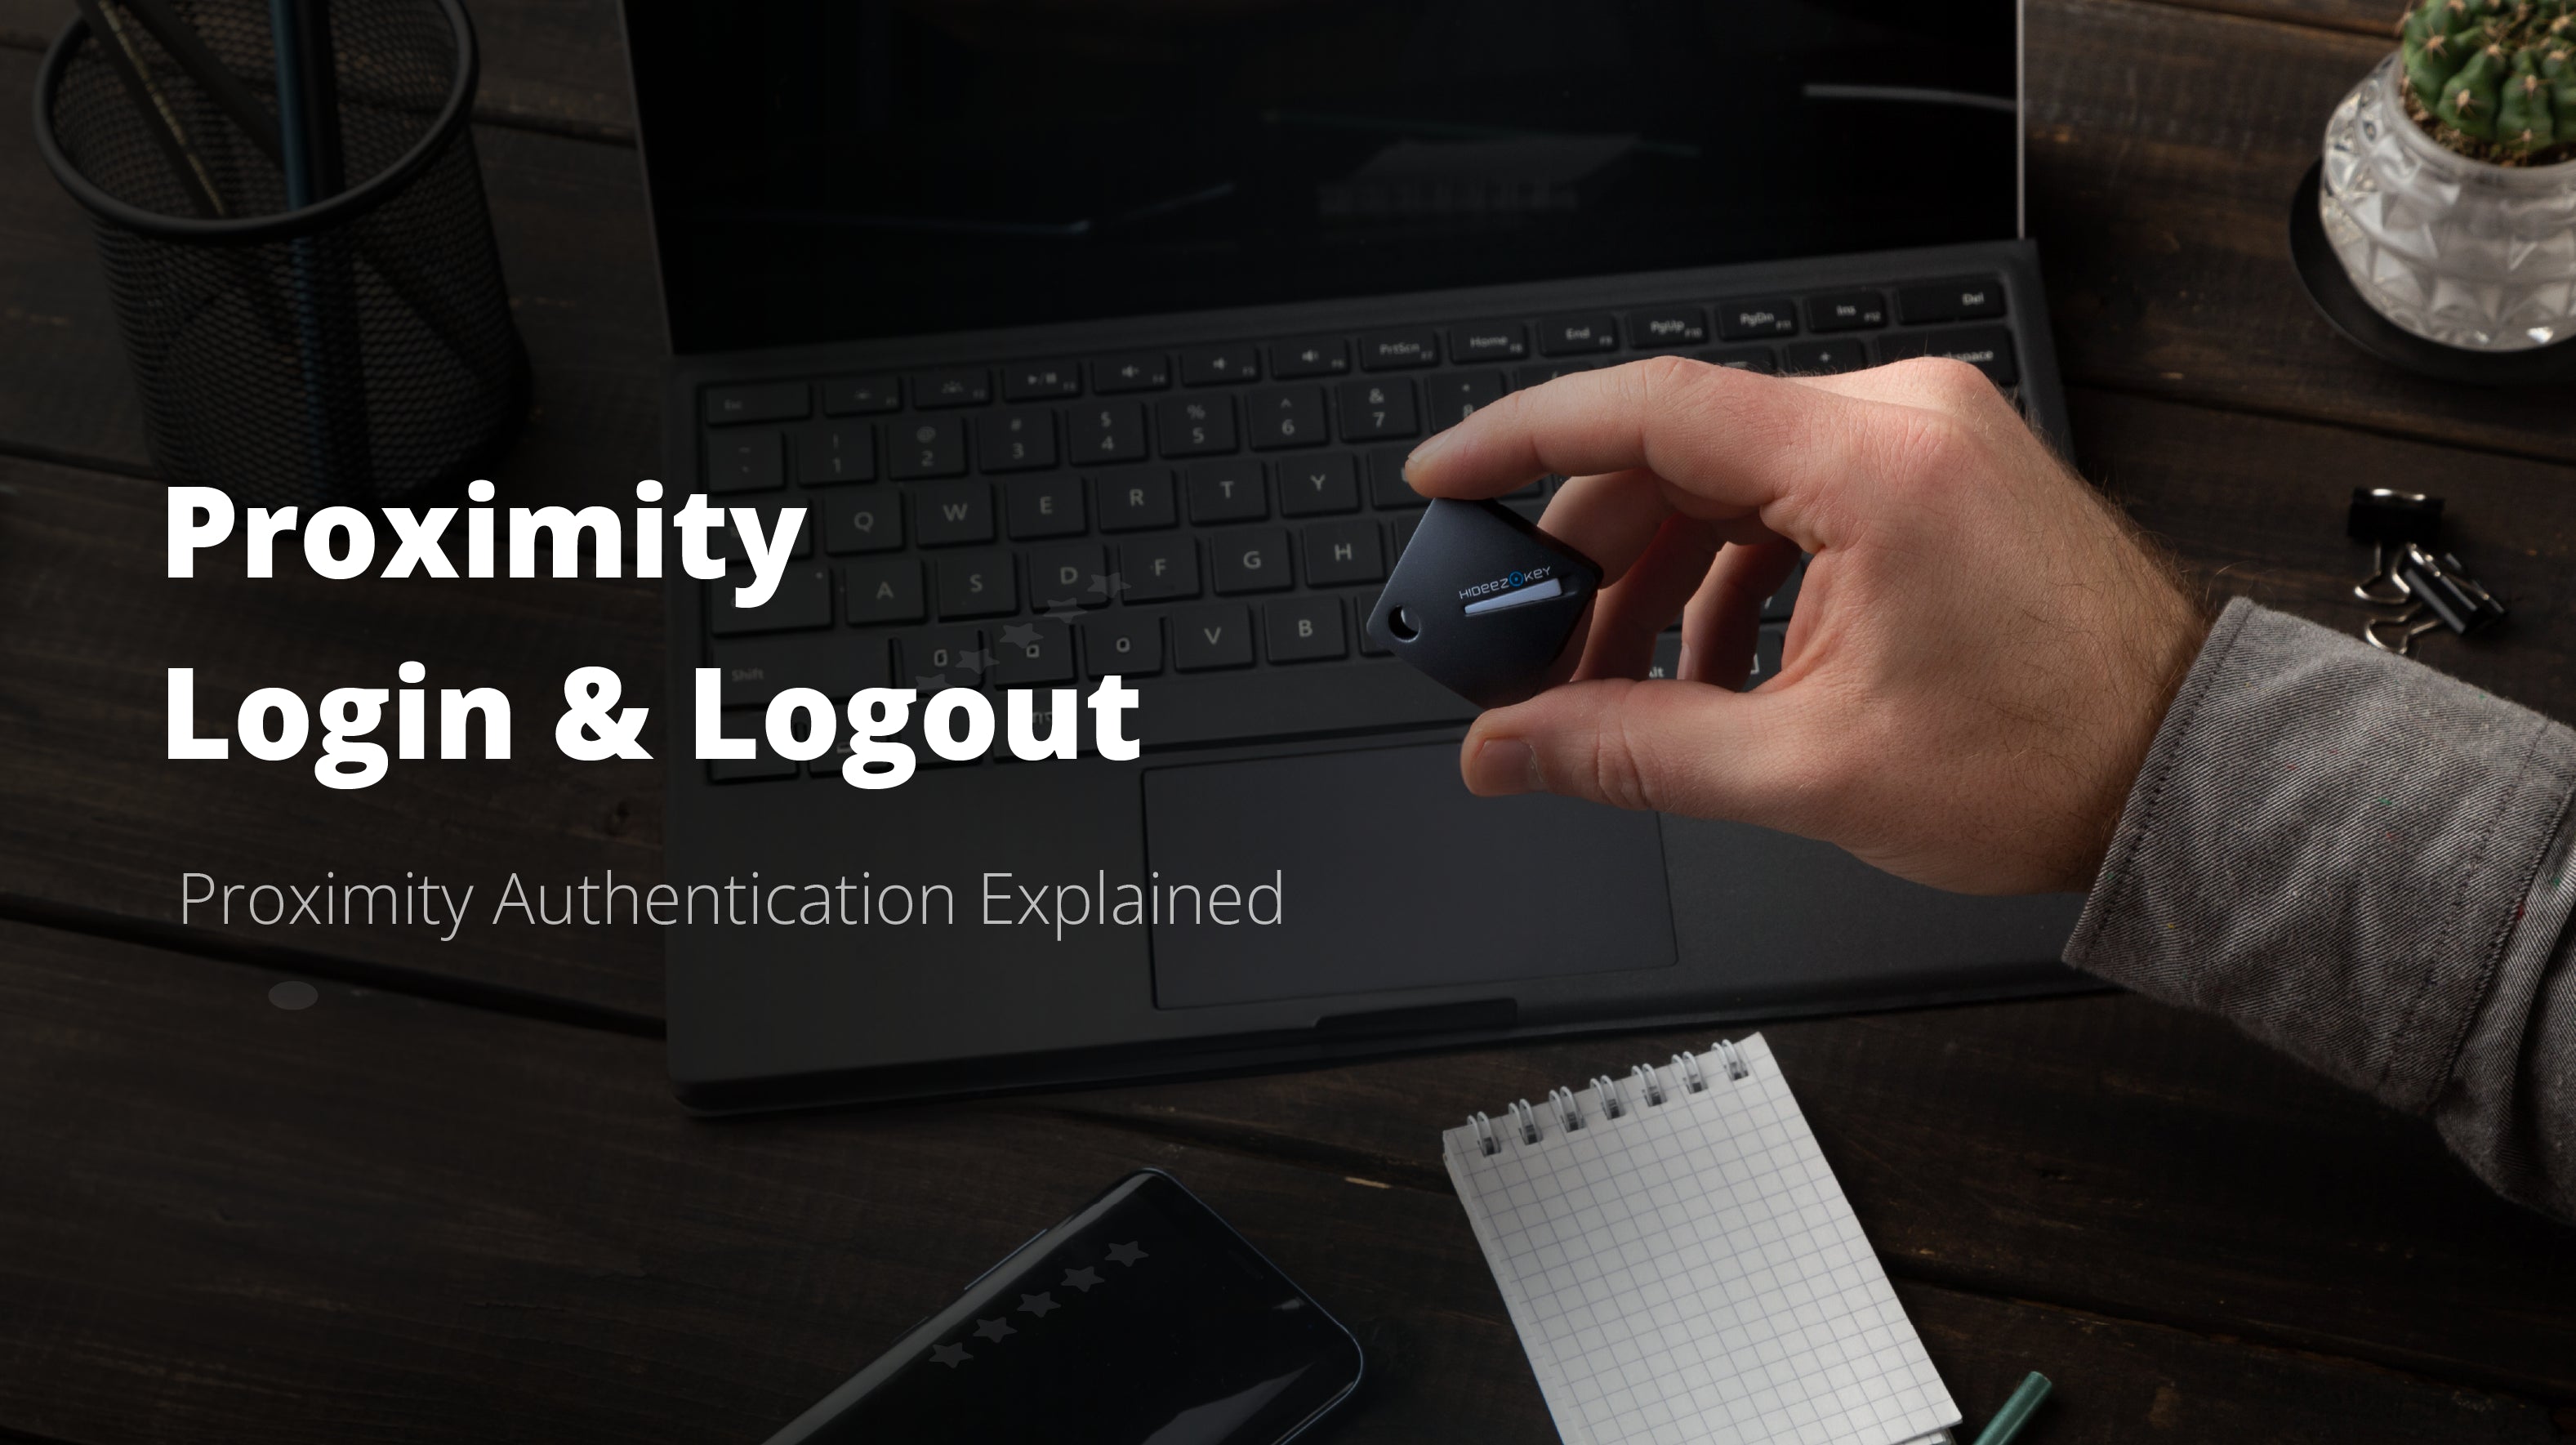 What Is Proximity Login? Proximity Authentication and MFA